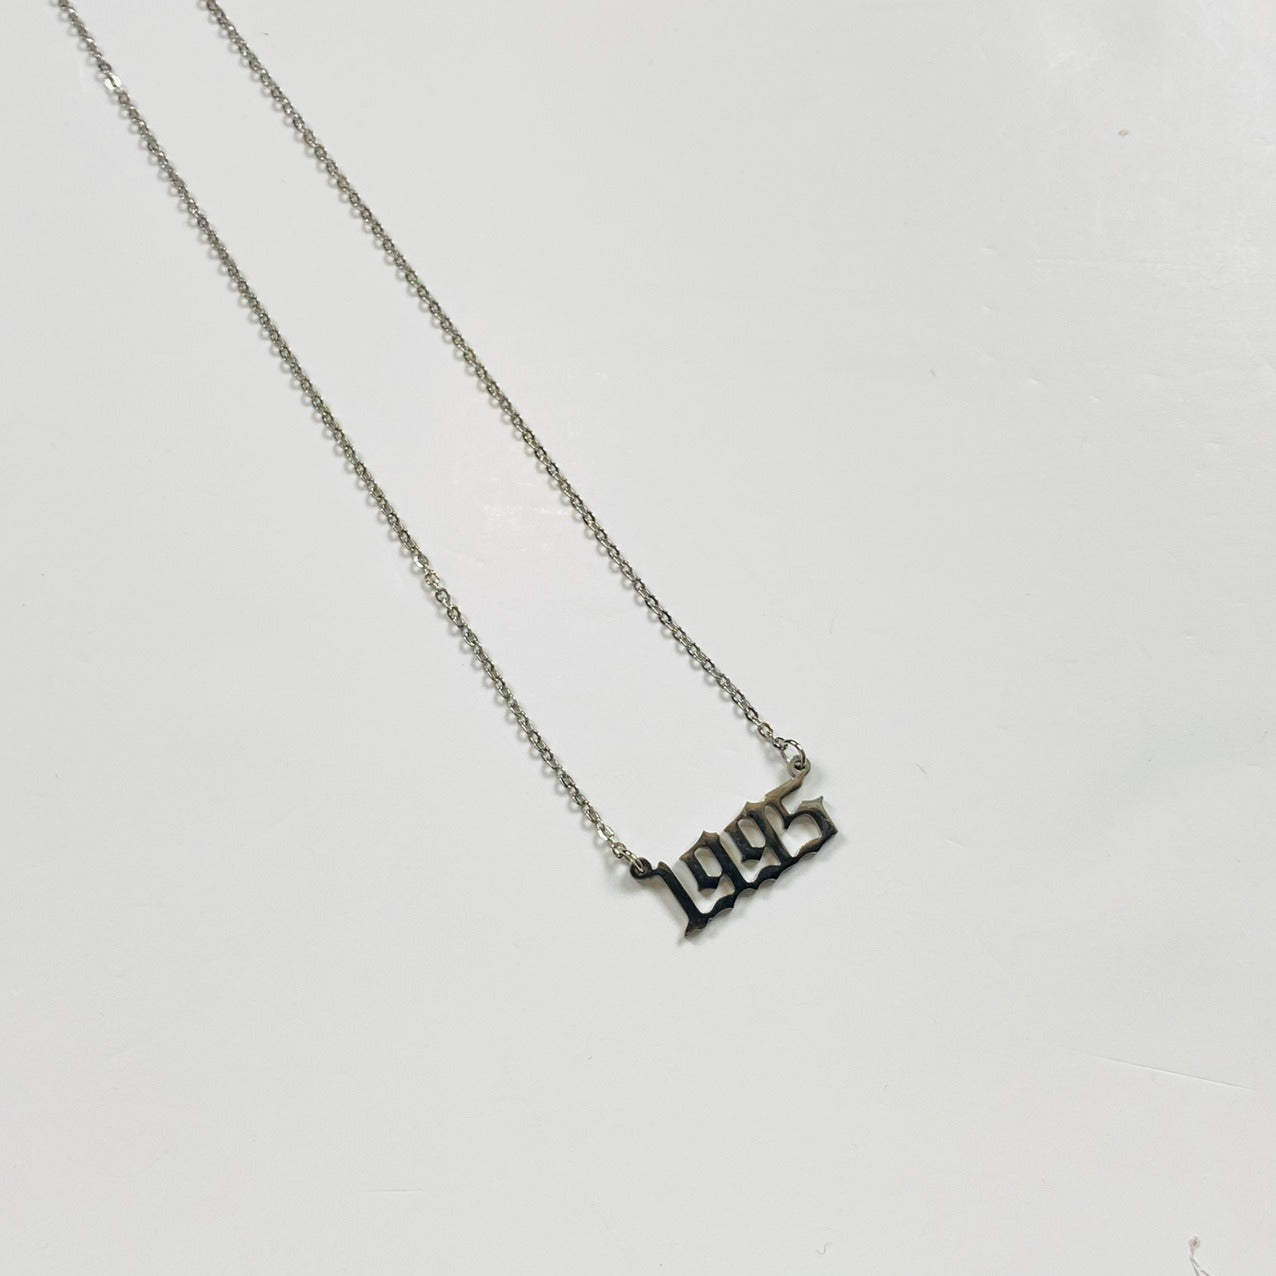 1995 Birth Year Necklace Chain Silver